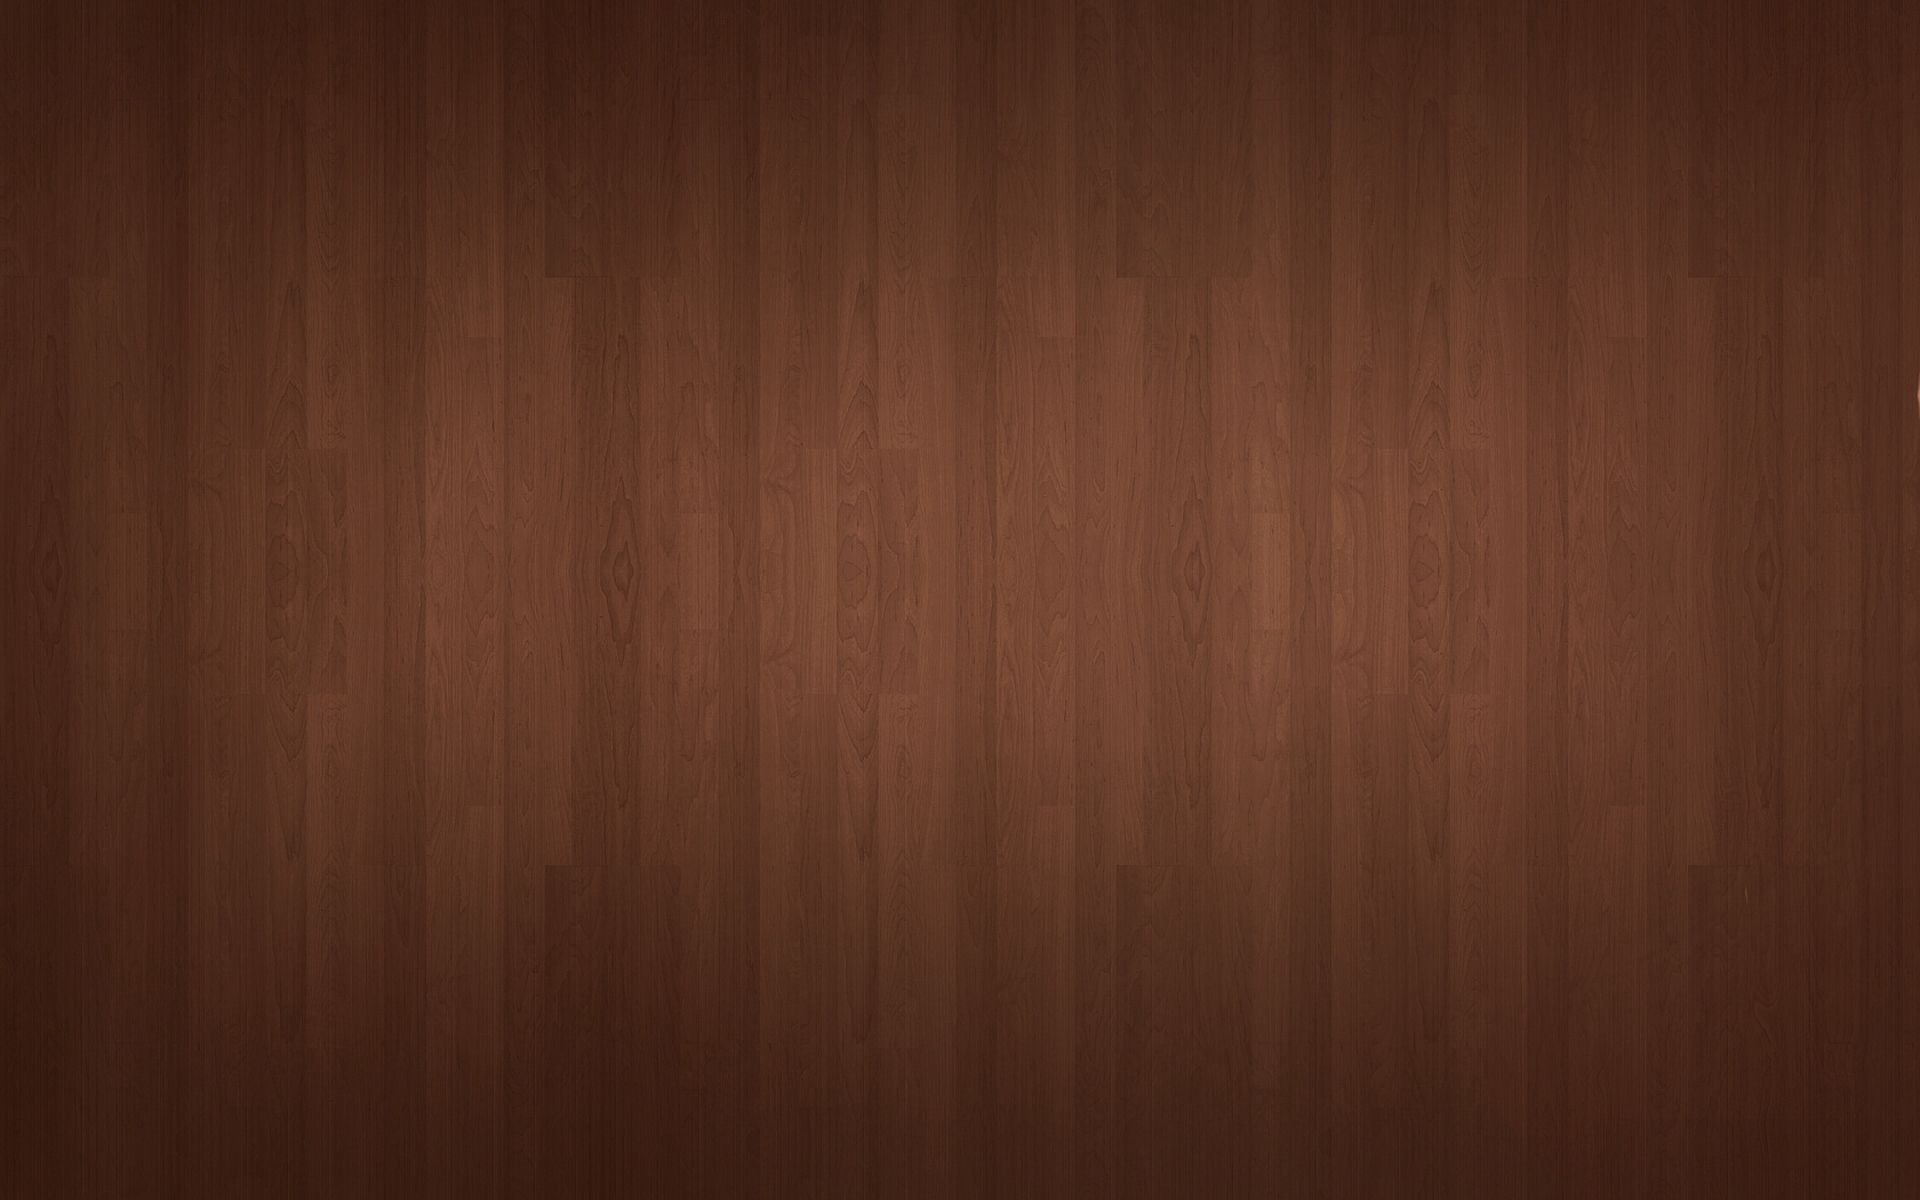 textures, wooden, texture, planks, board, background, wood lock screen backgrounds